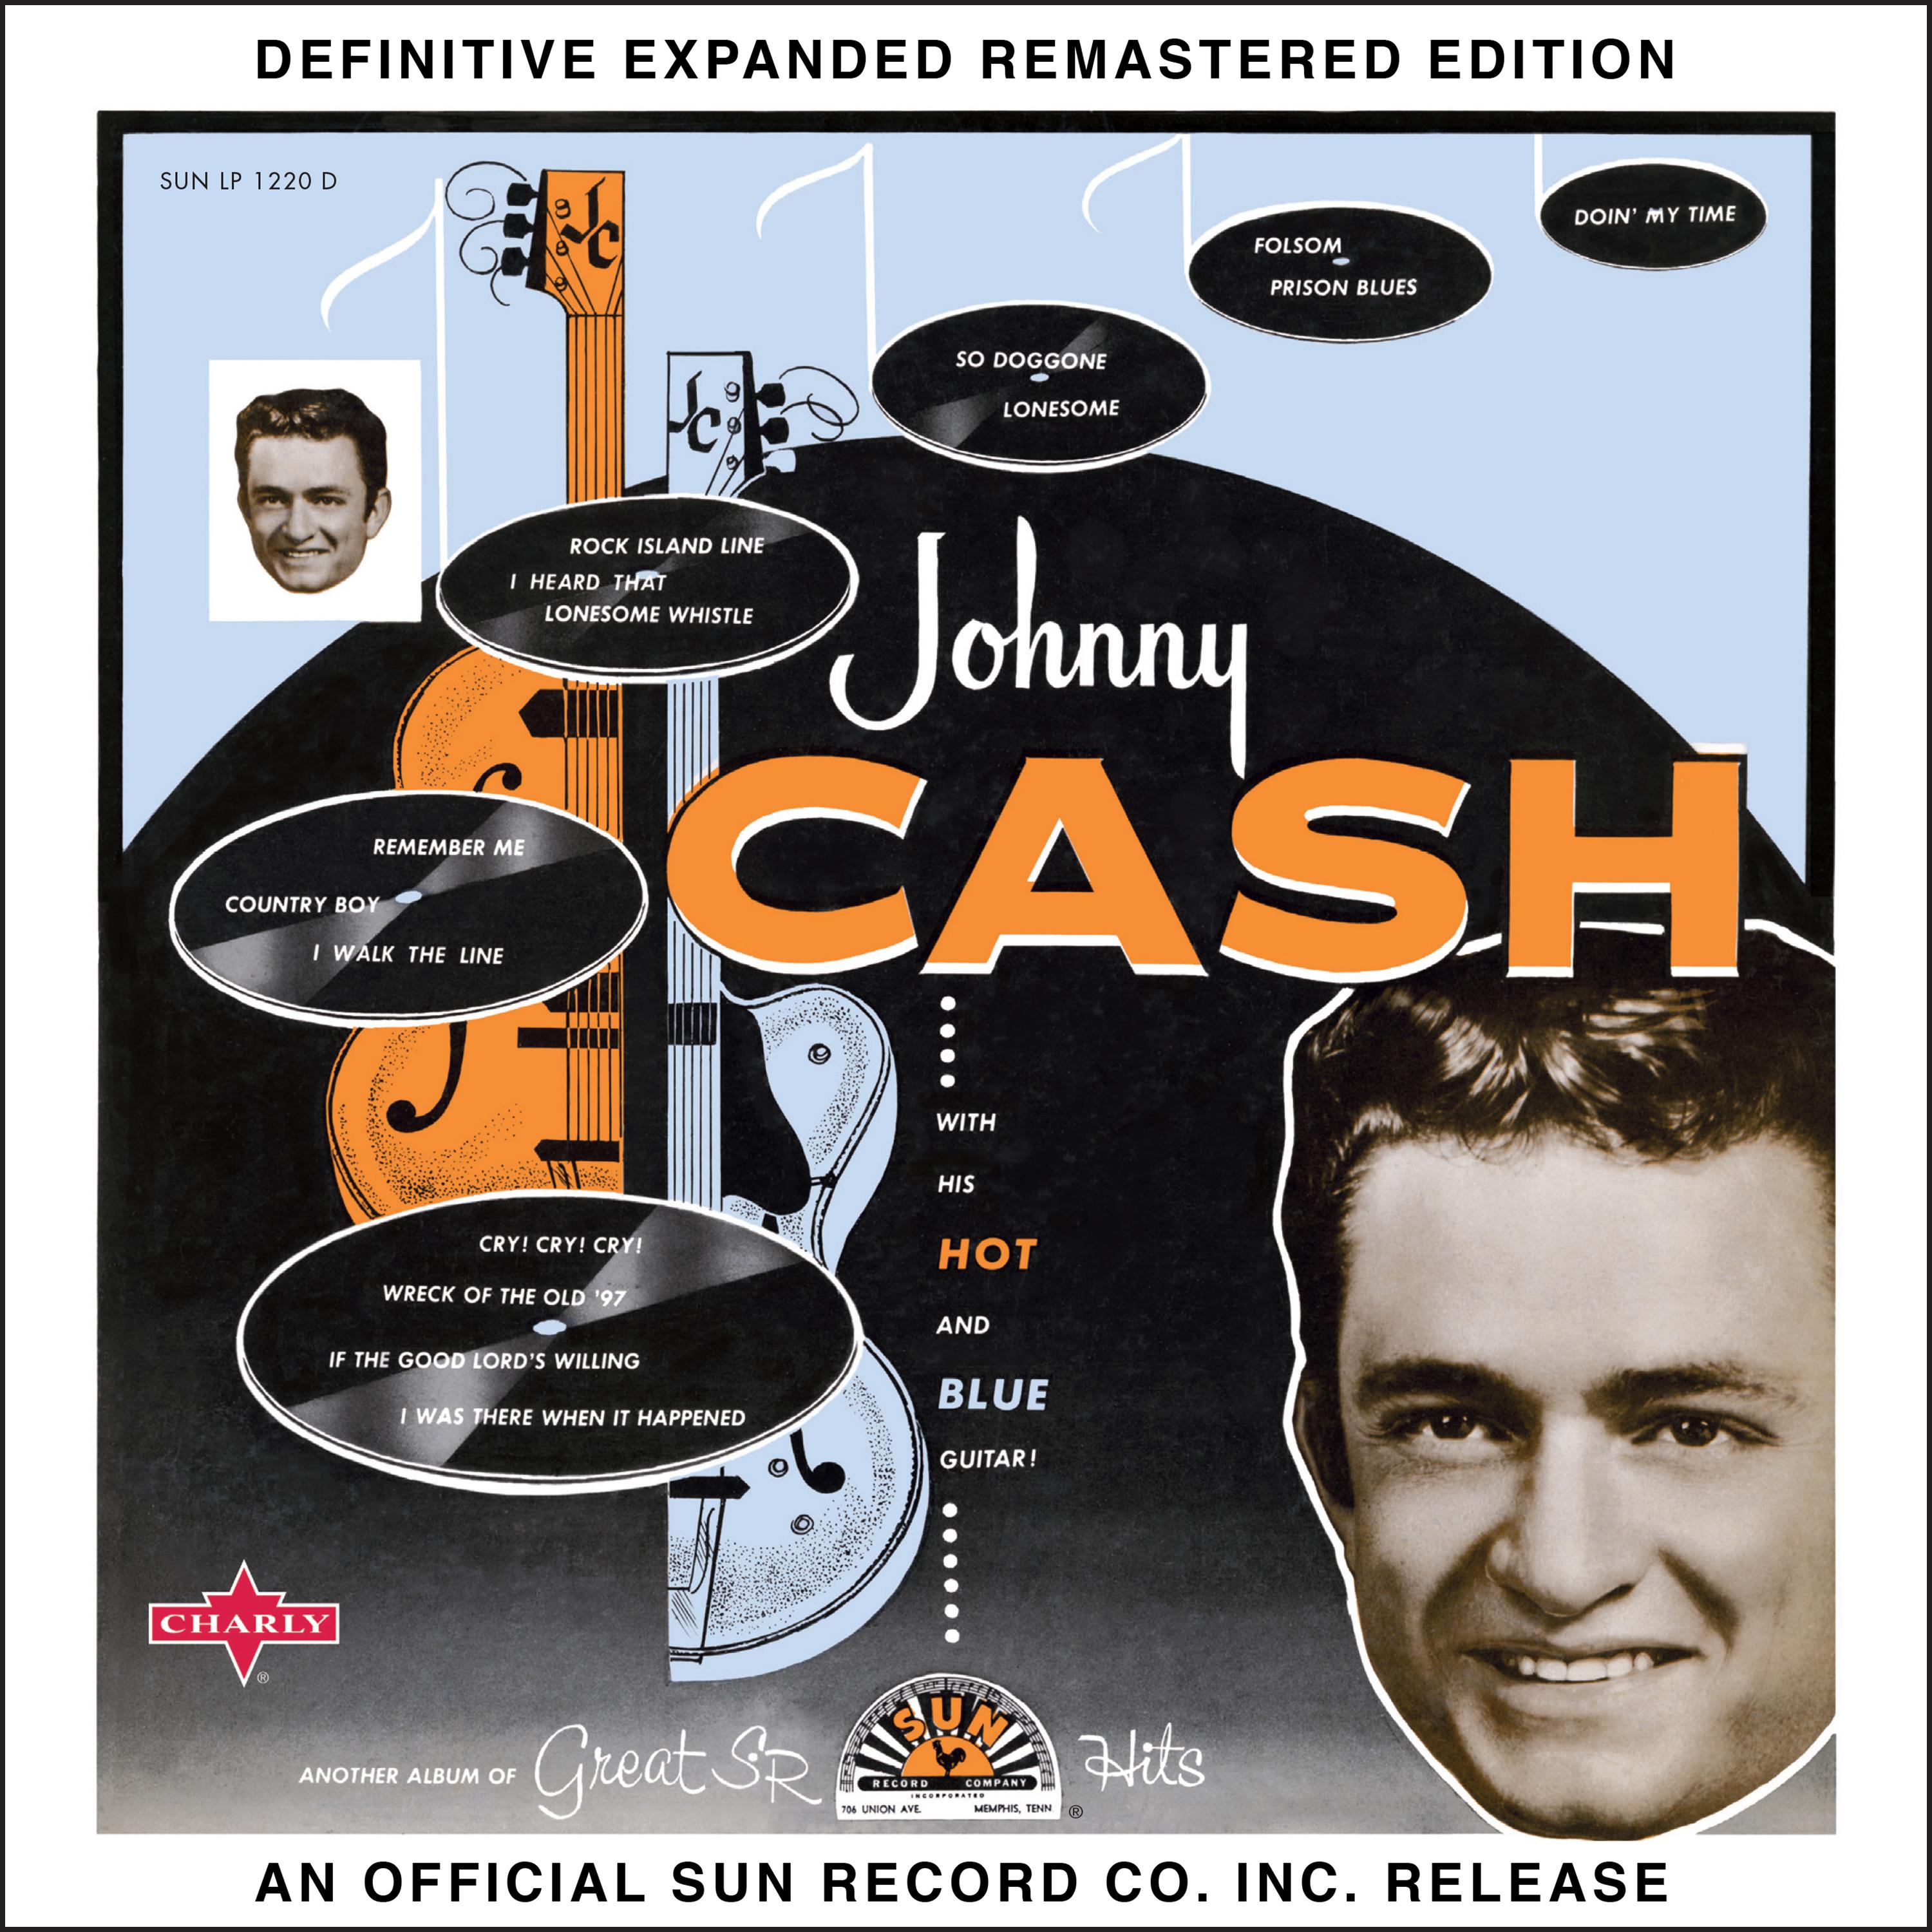 Johnny Cash with His Hot and Blue Guitar (2017 Definitive Expanded Remastered Edition)